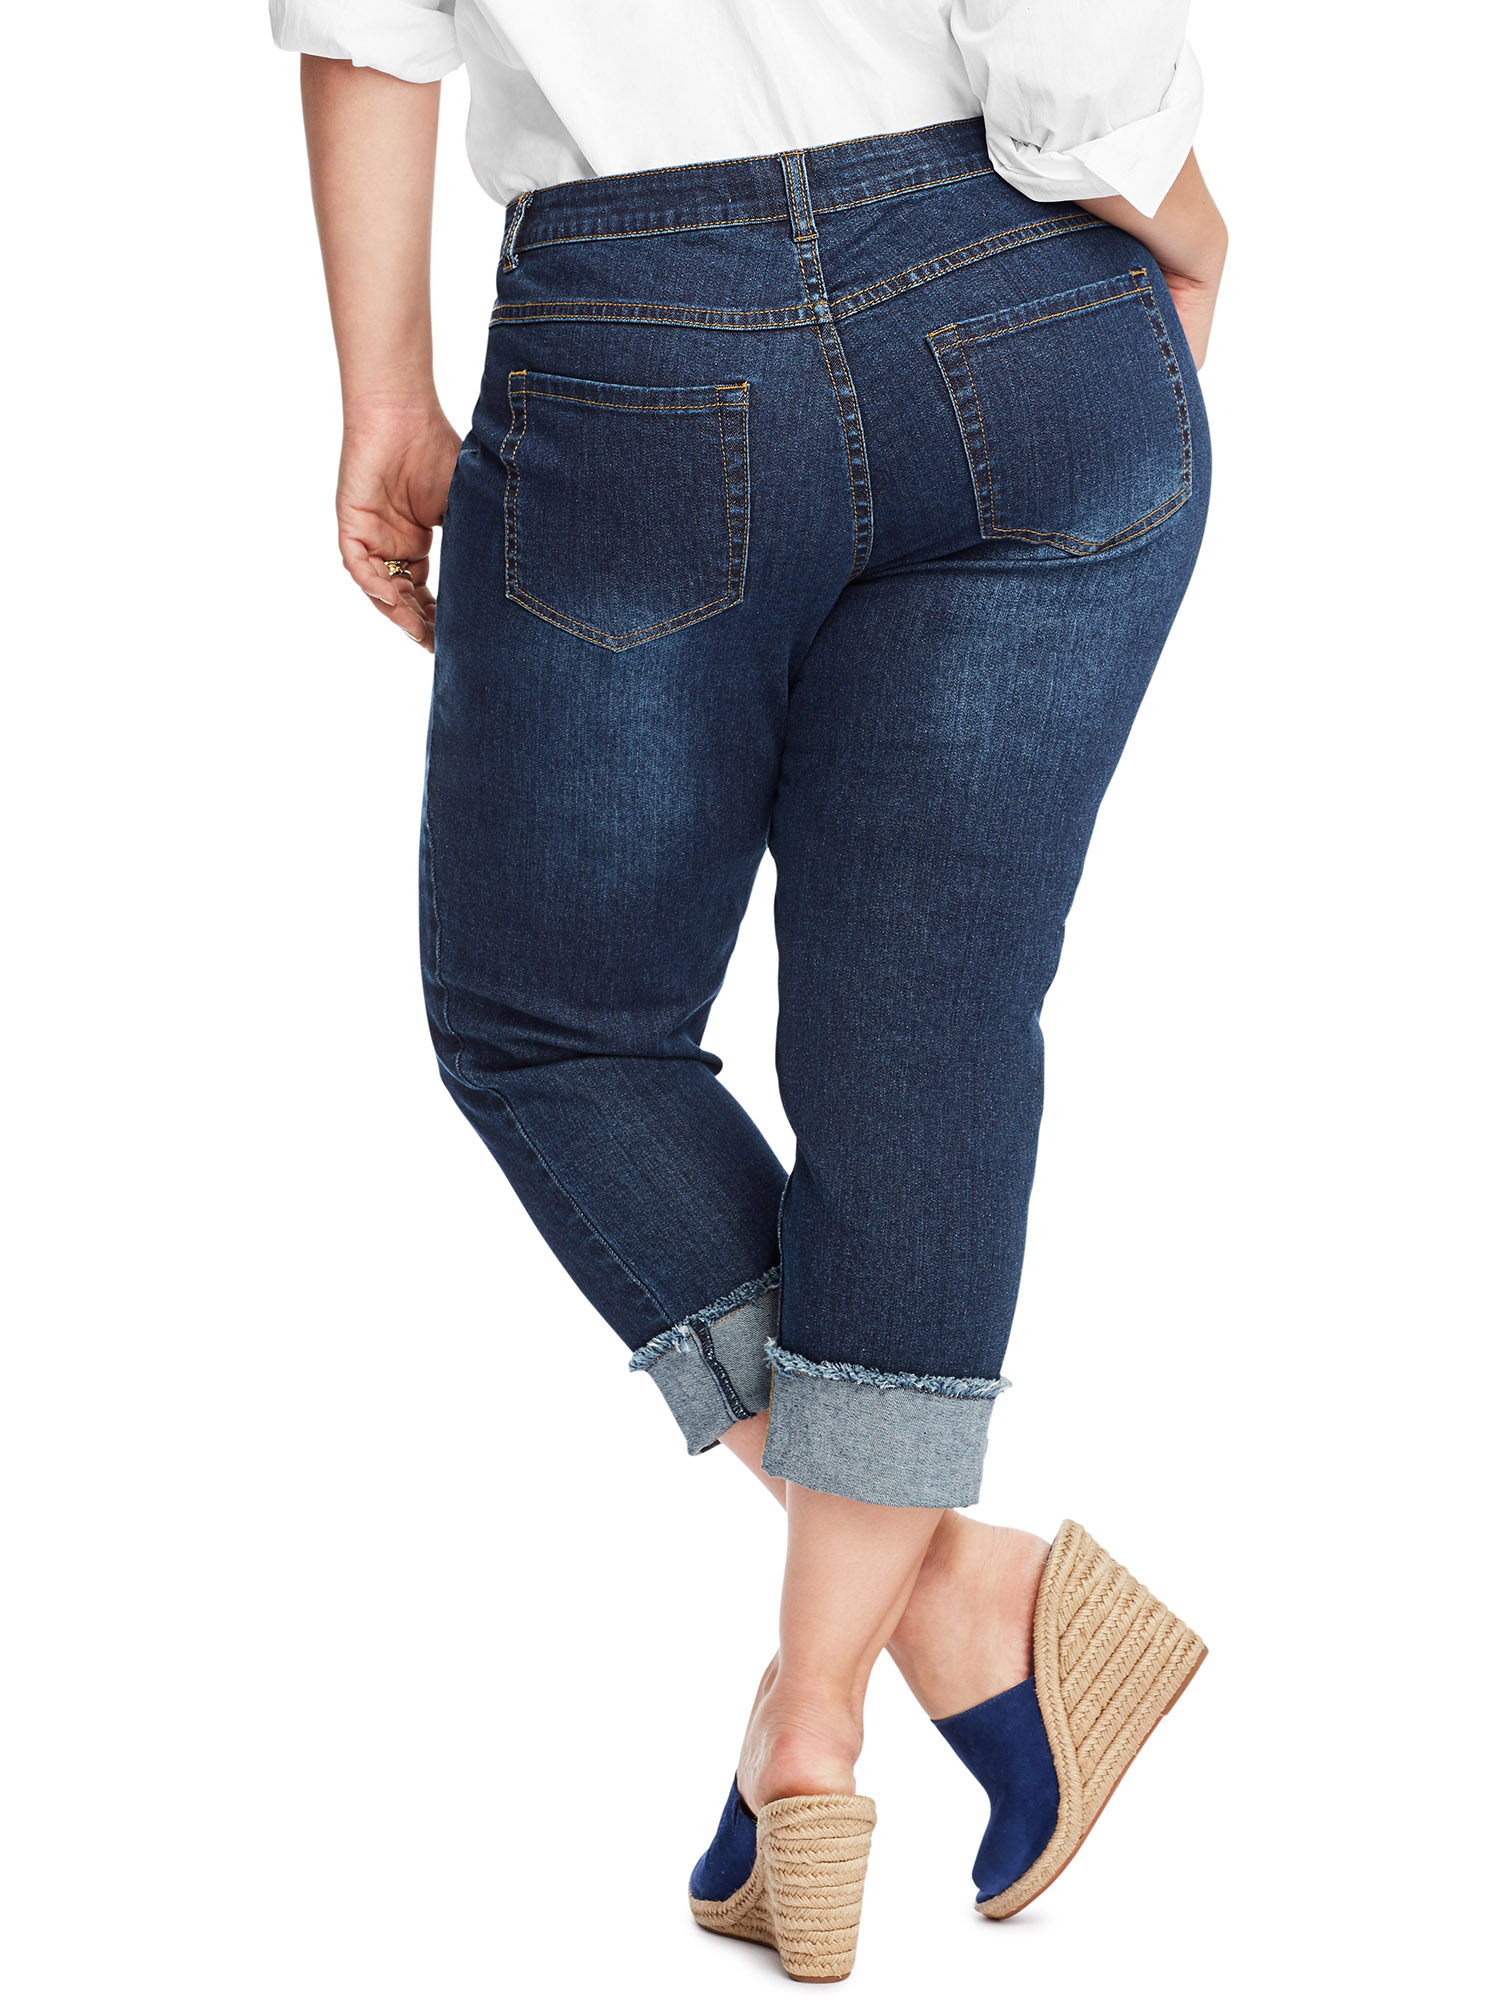 Just My Size Women's Plus Size Frayed Cuff Capri Jeans - image 2 of 4